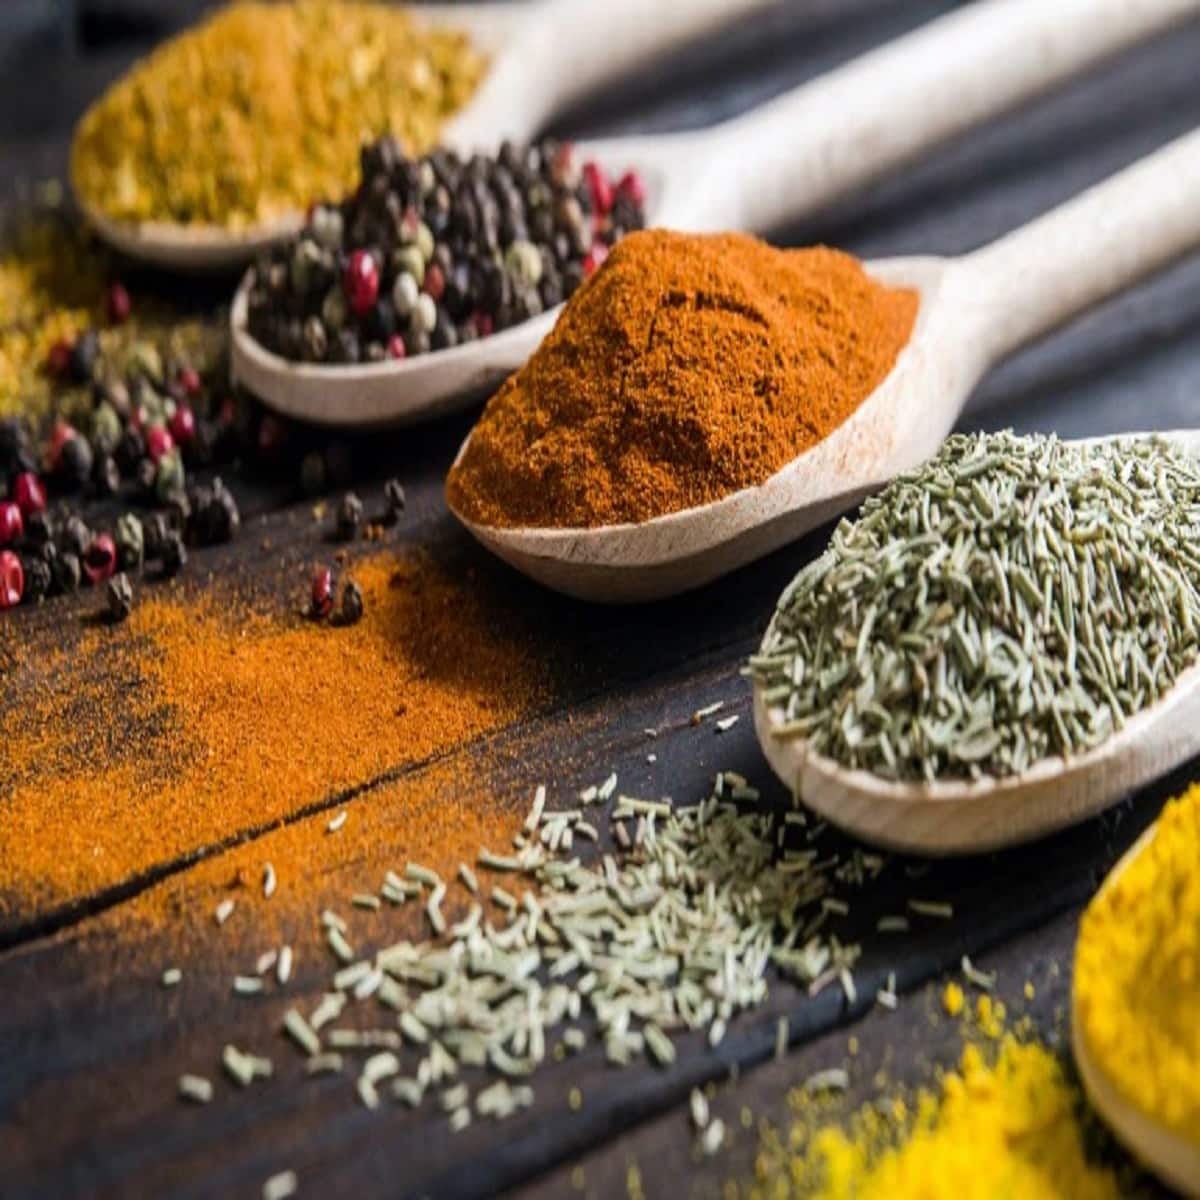 7 Spices For Easy And Fast Weight Loss